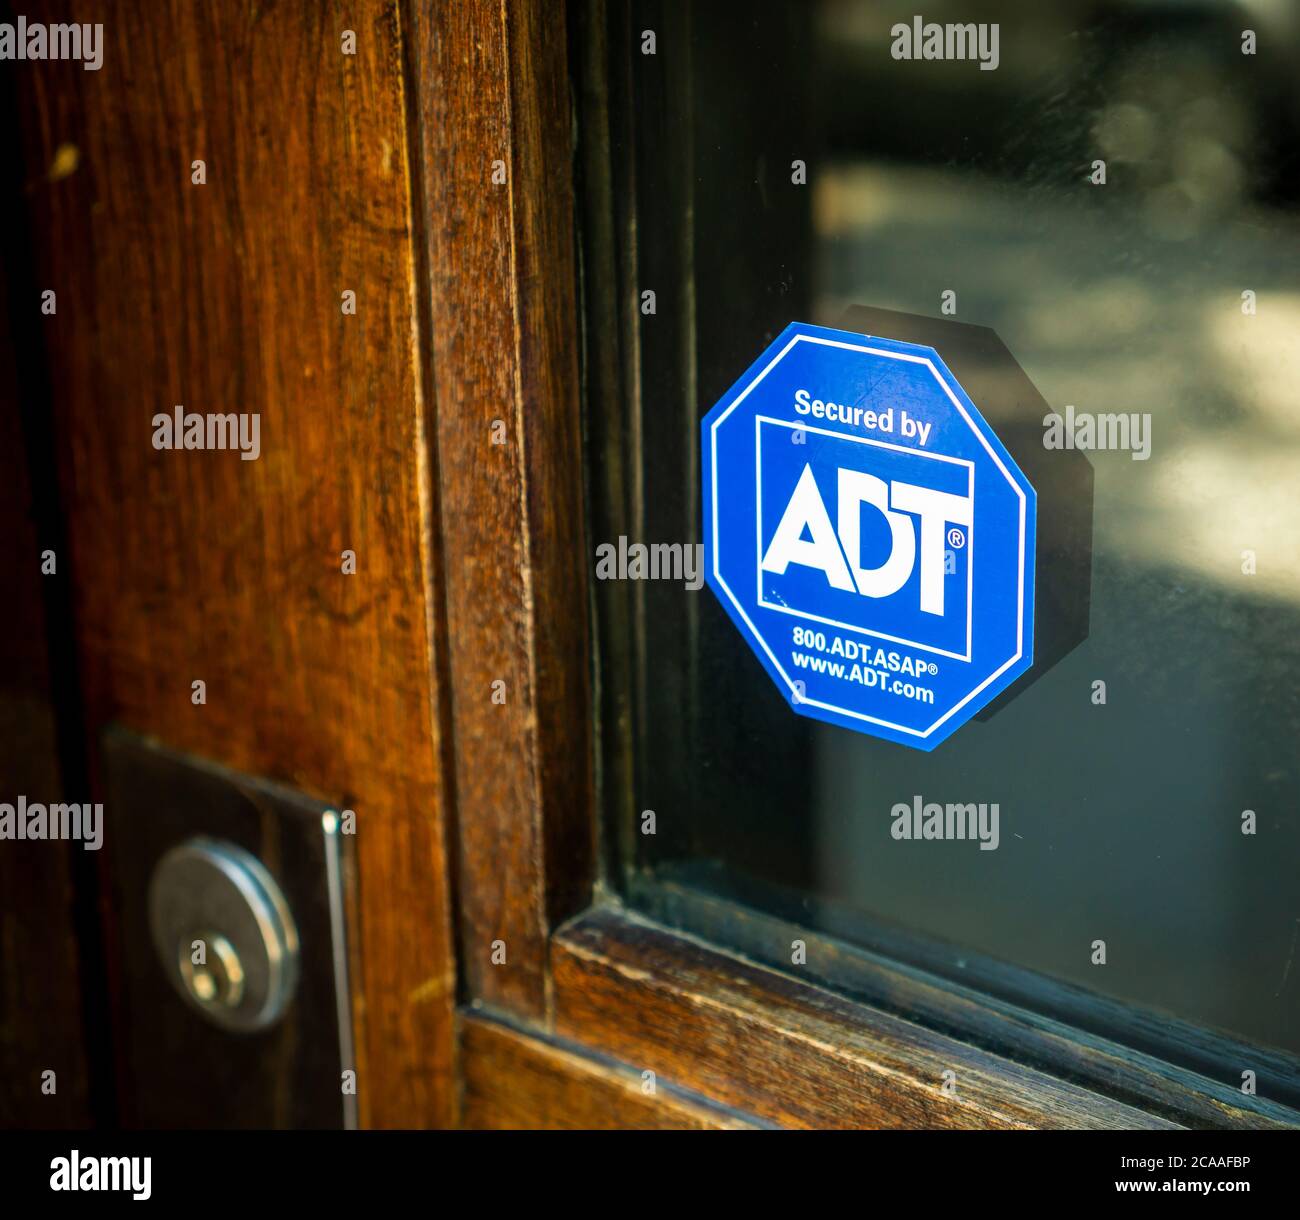 Page 2 - Adt High Resolution Stock Photography and Images - Alamy